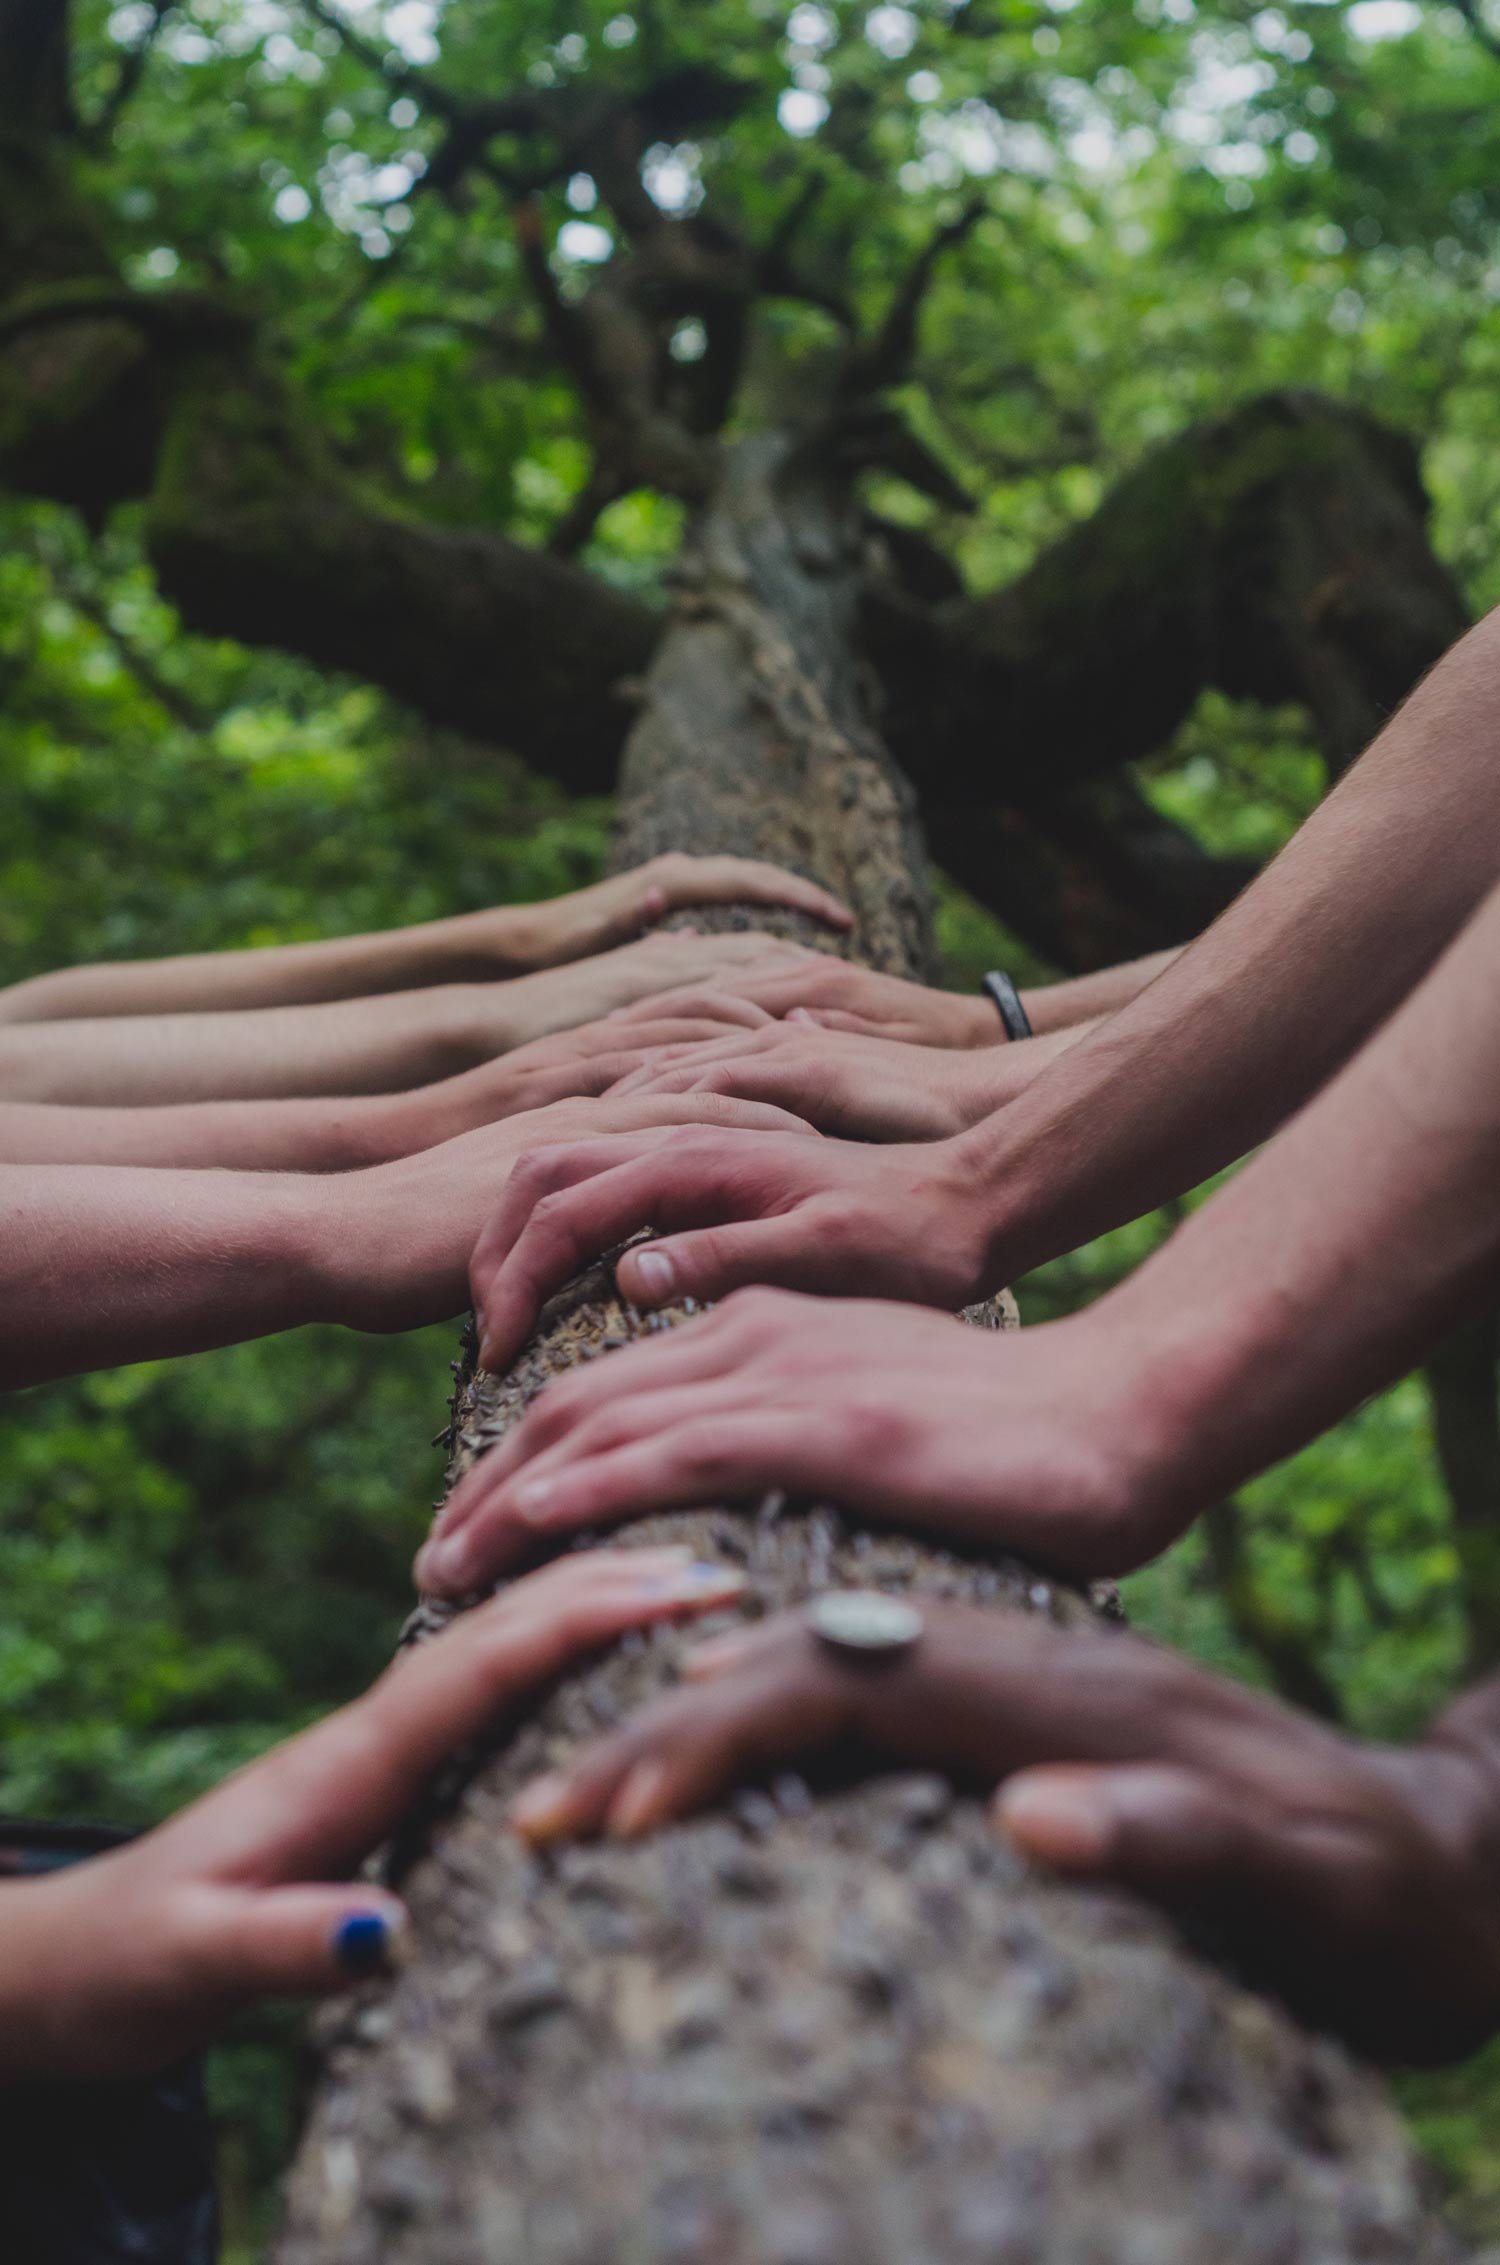 The hands of several people resting side by side on a log in the deciduous forest 